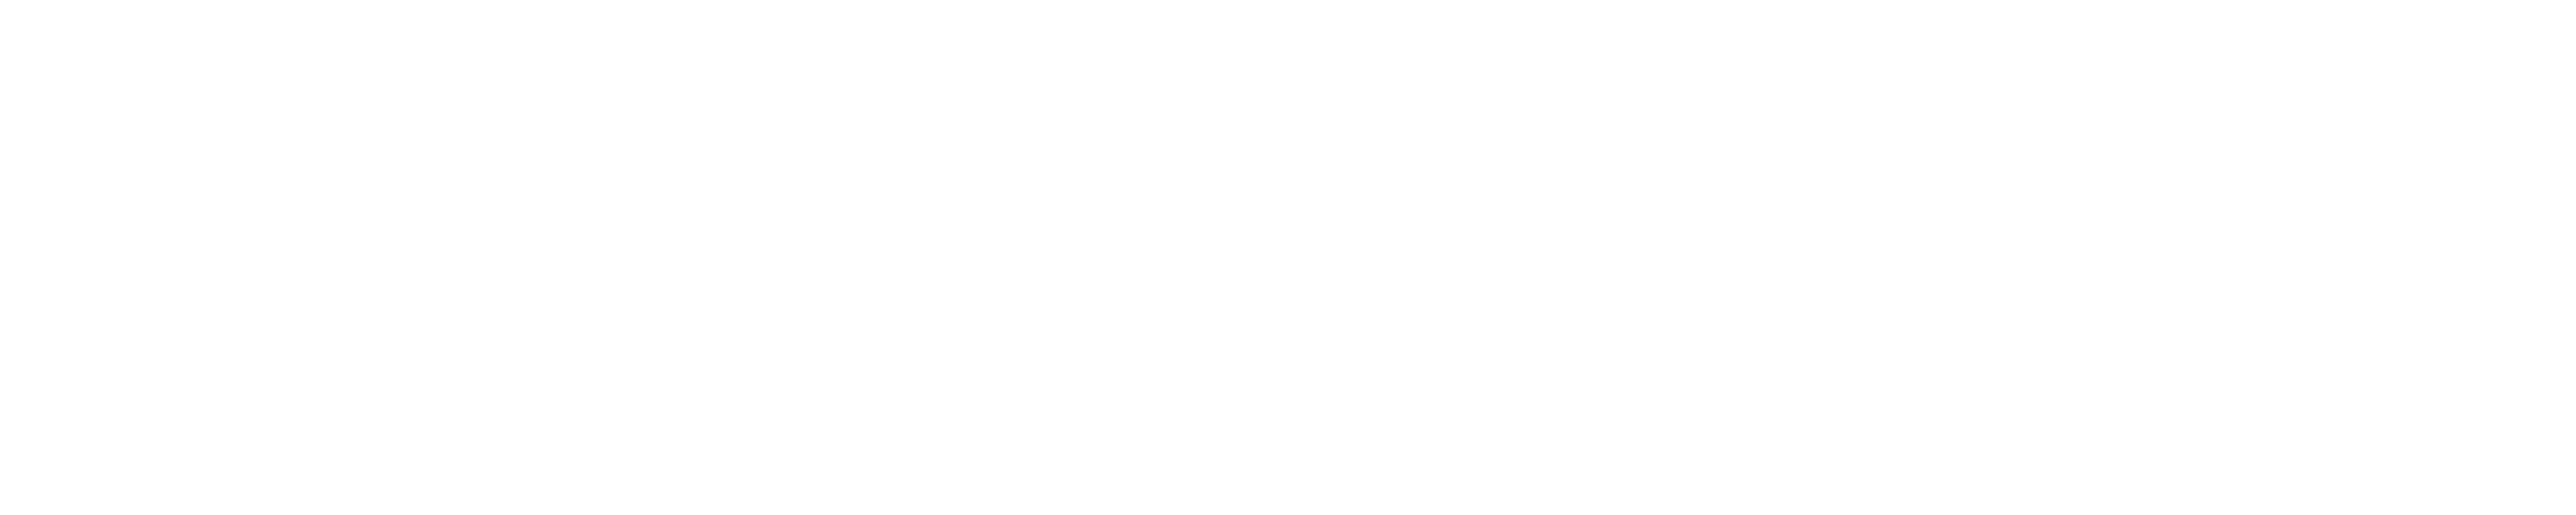 Open Journal Systems